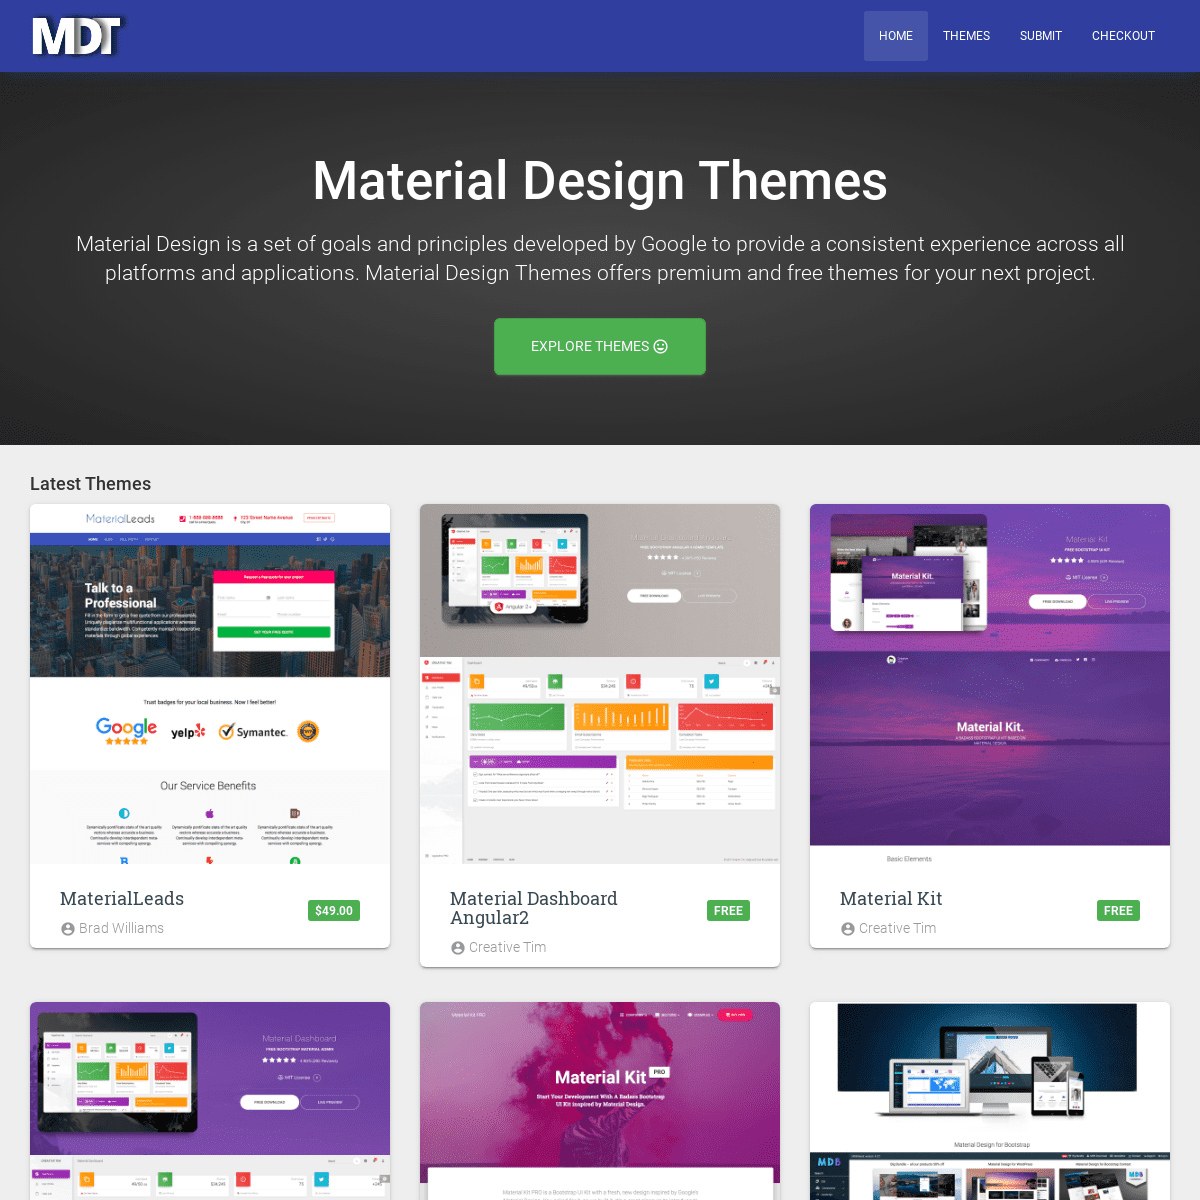 Material Design Themes